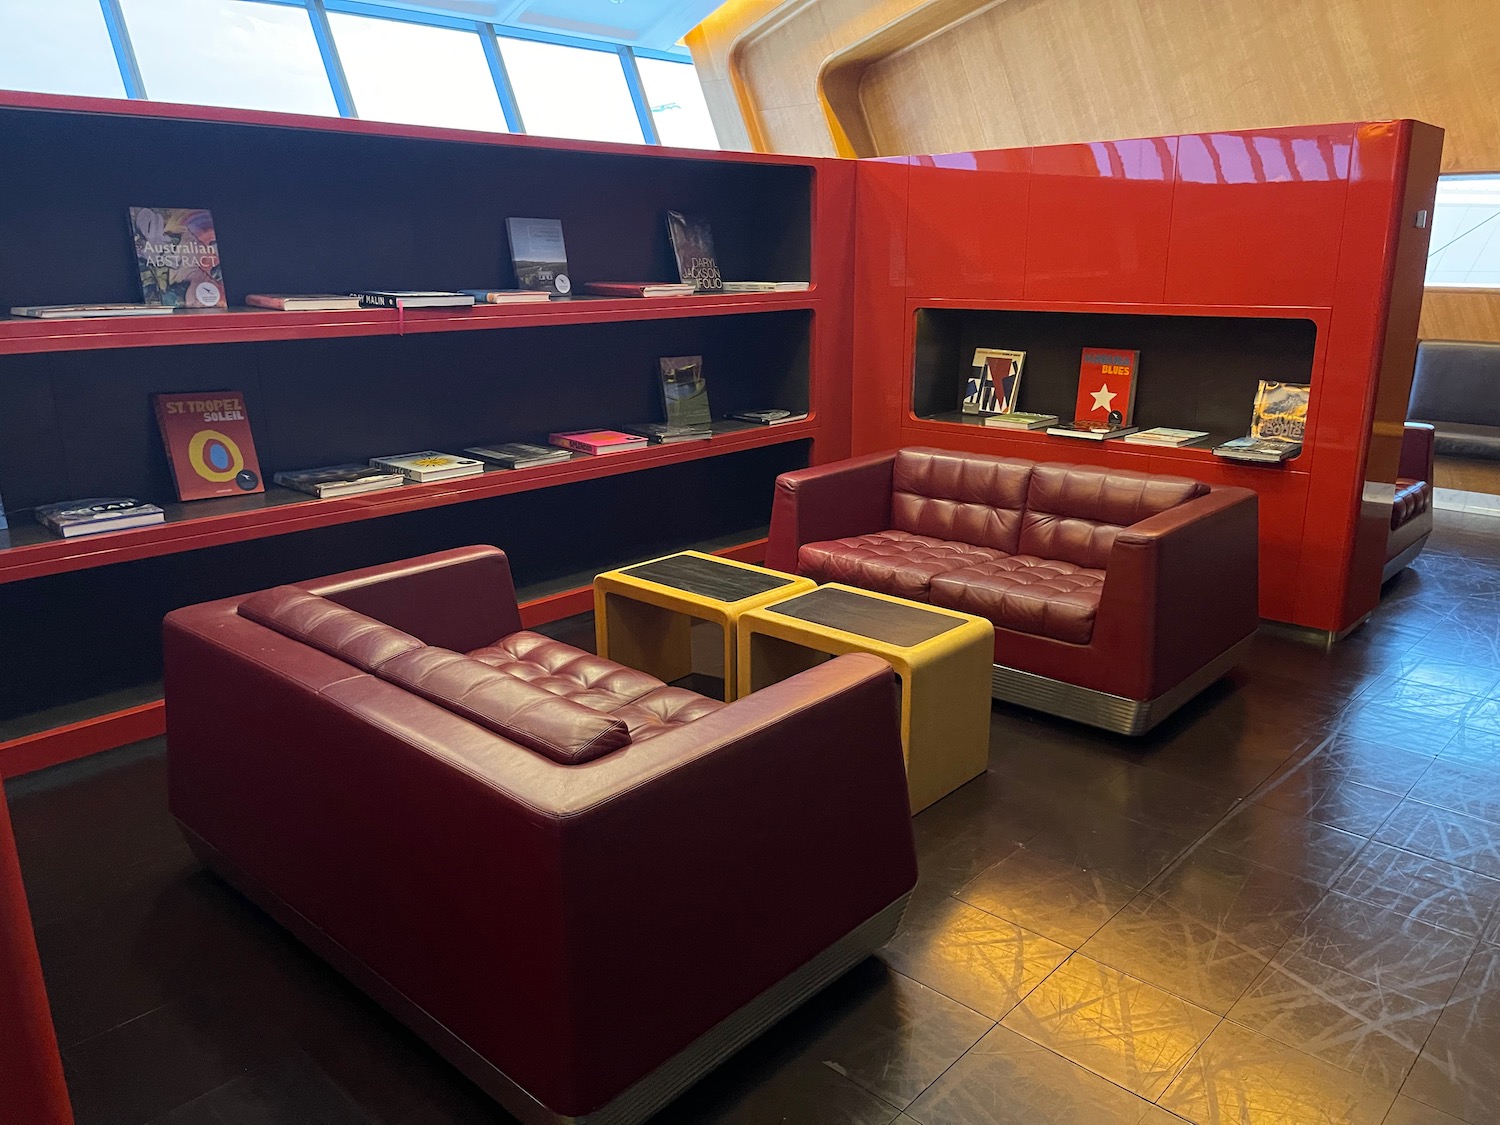 a room with red couches and shelves